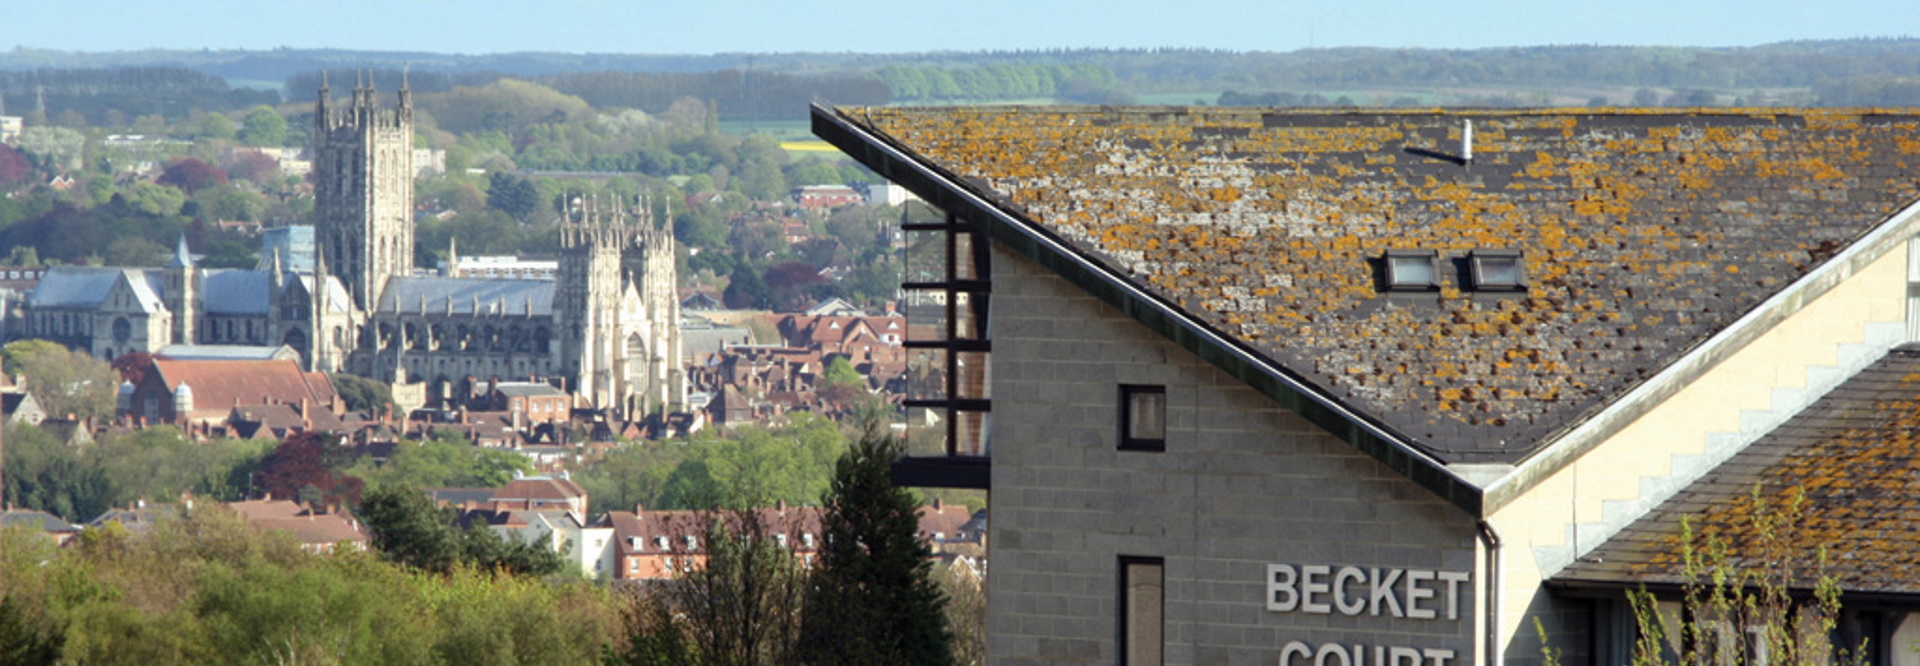 Looking at the Canterbury Cathedral from the campus of the University of Kent